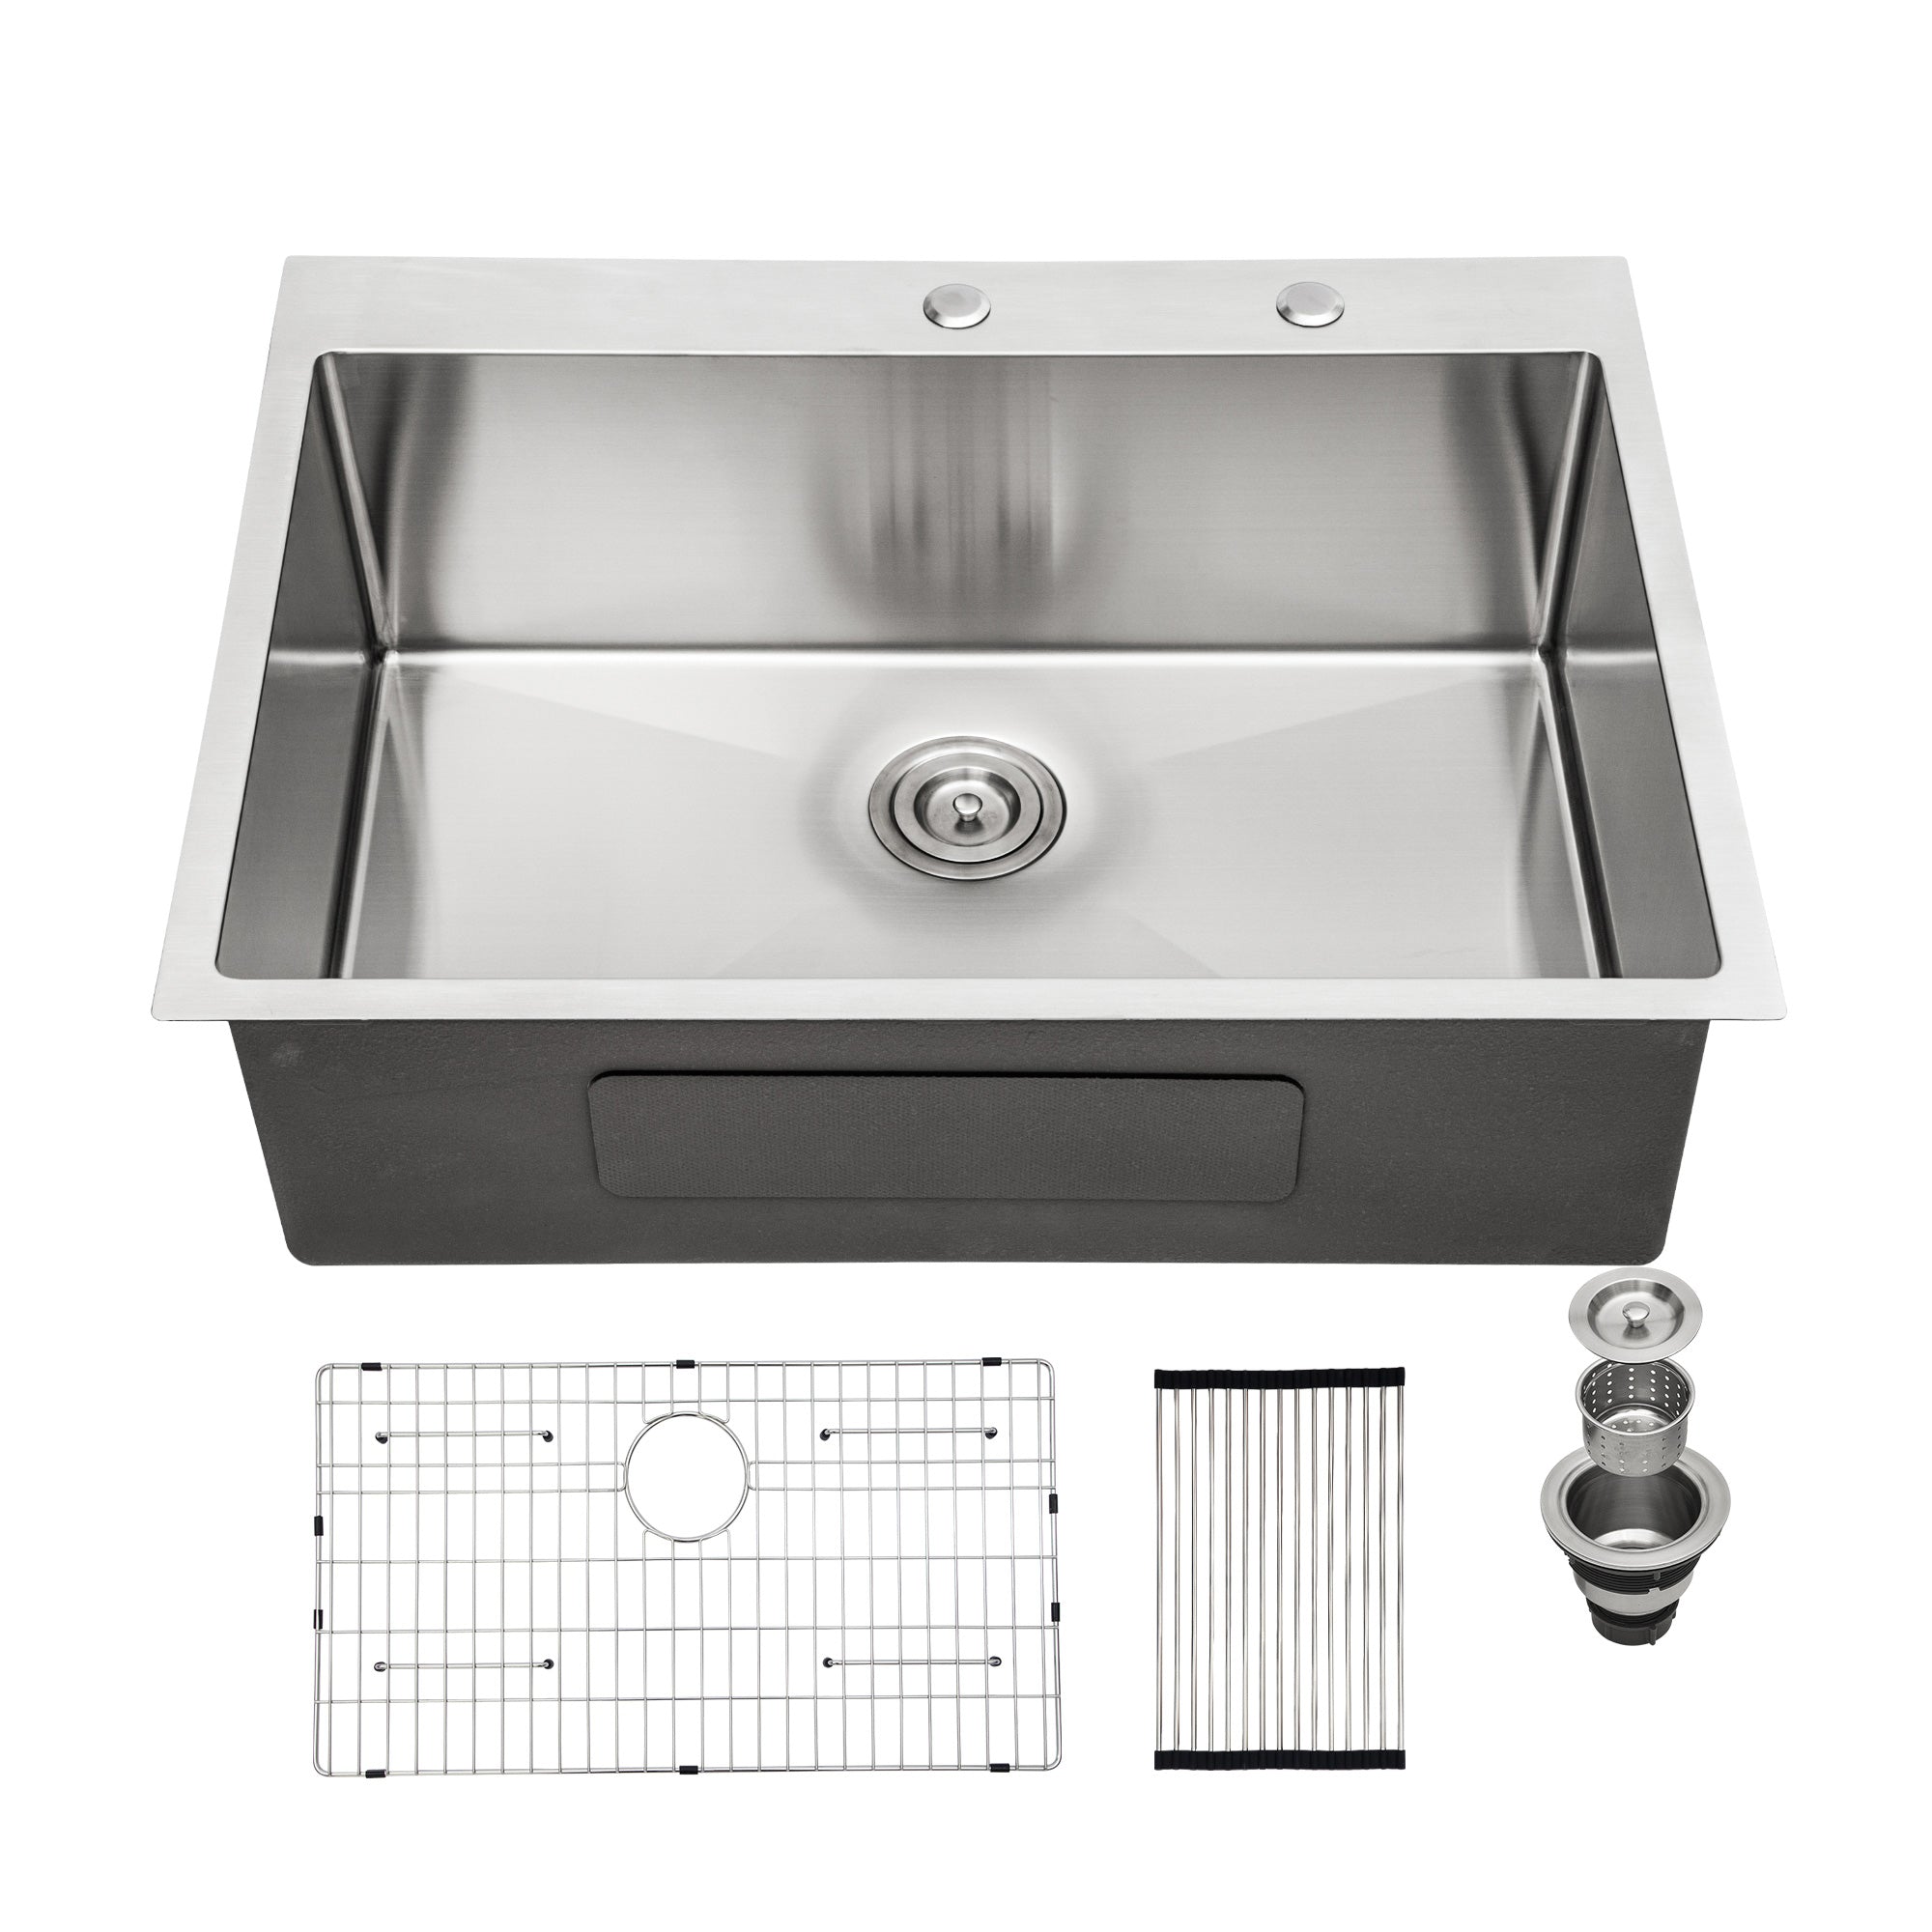 Drop-in Single Bowl Stainless Steel Kitchen Sink RX-SS16